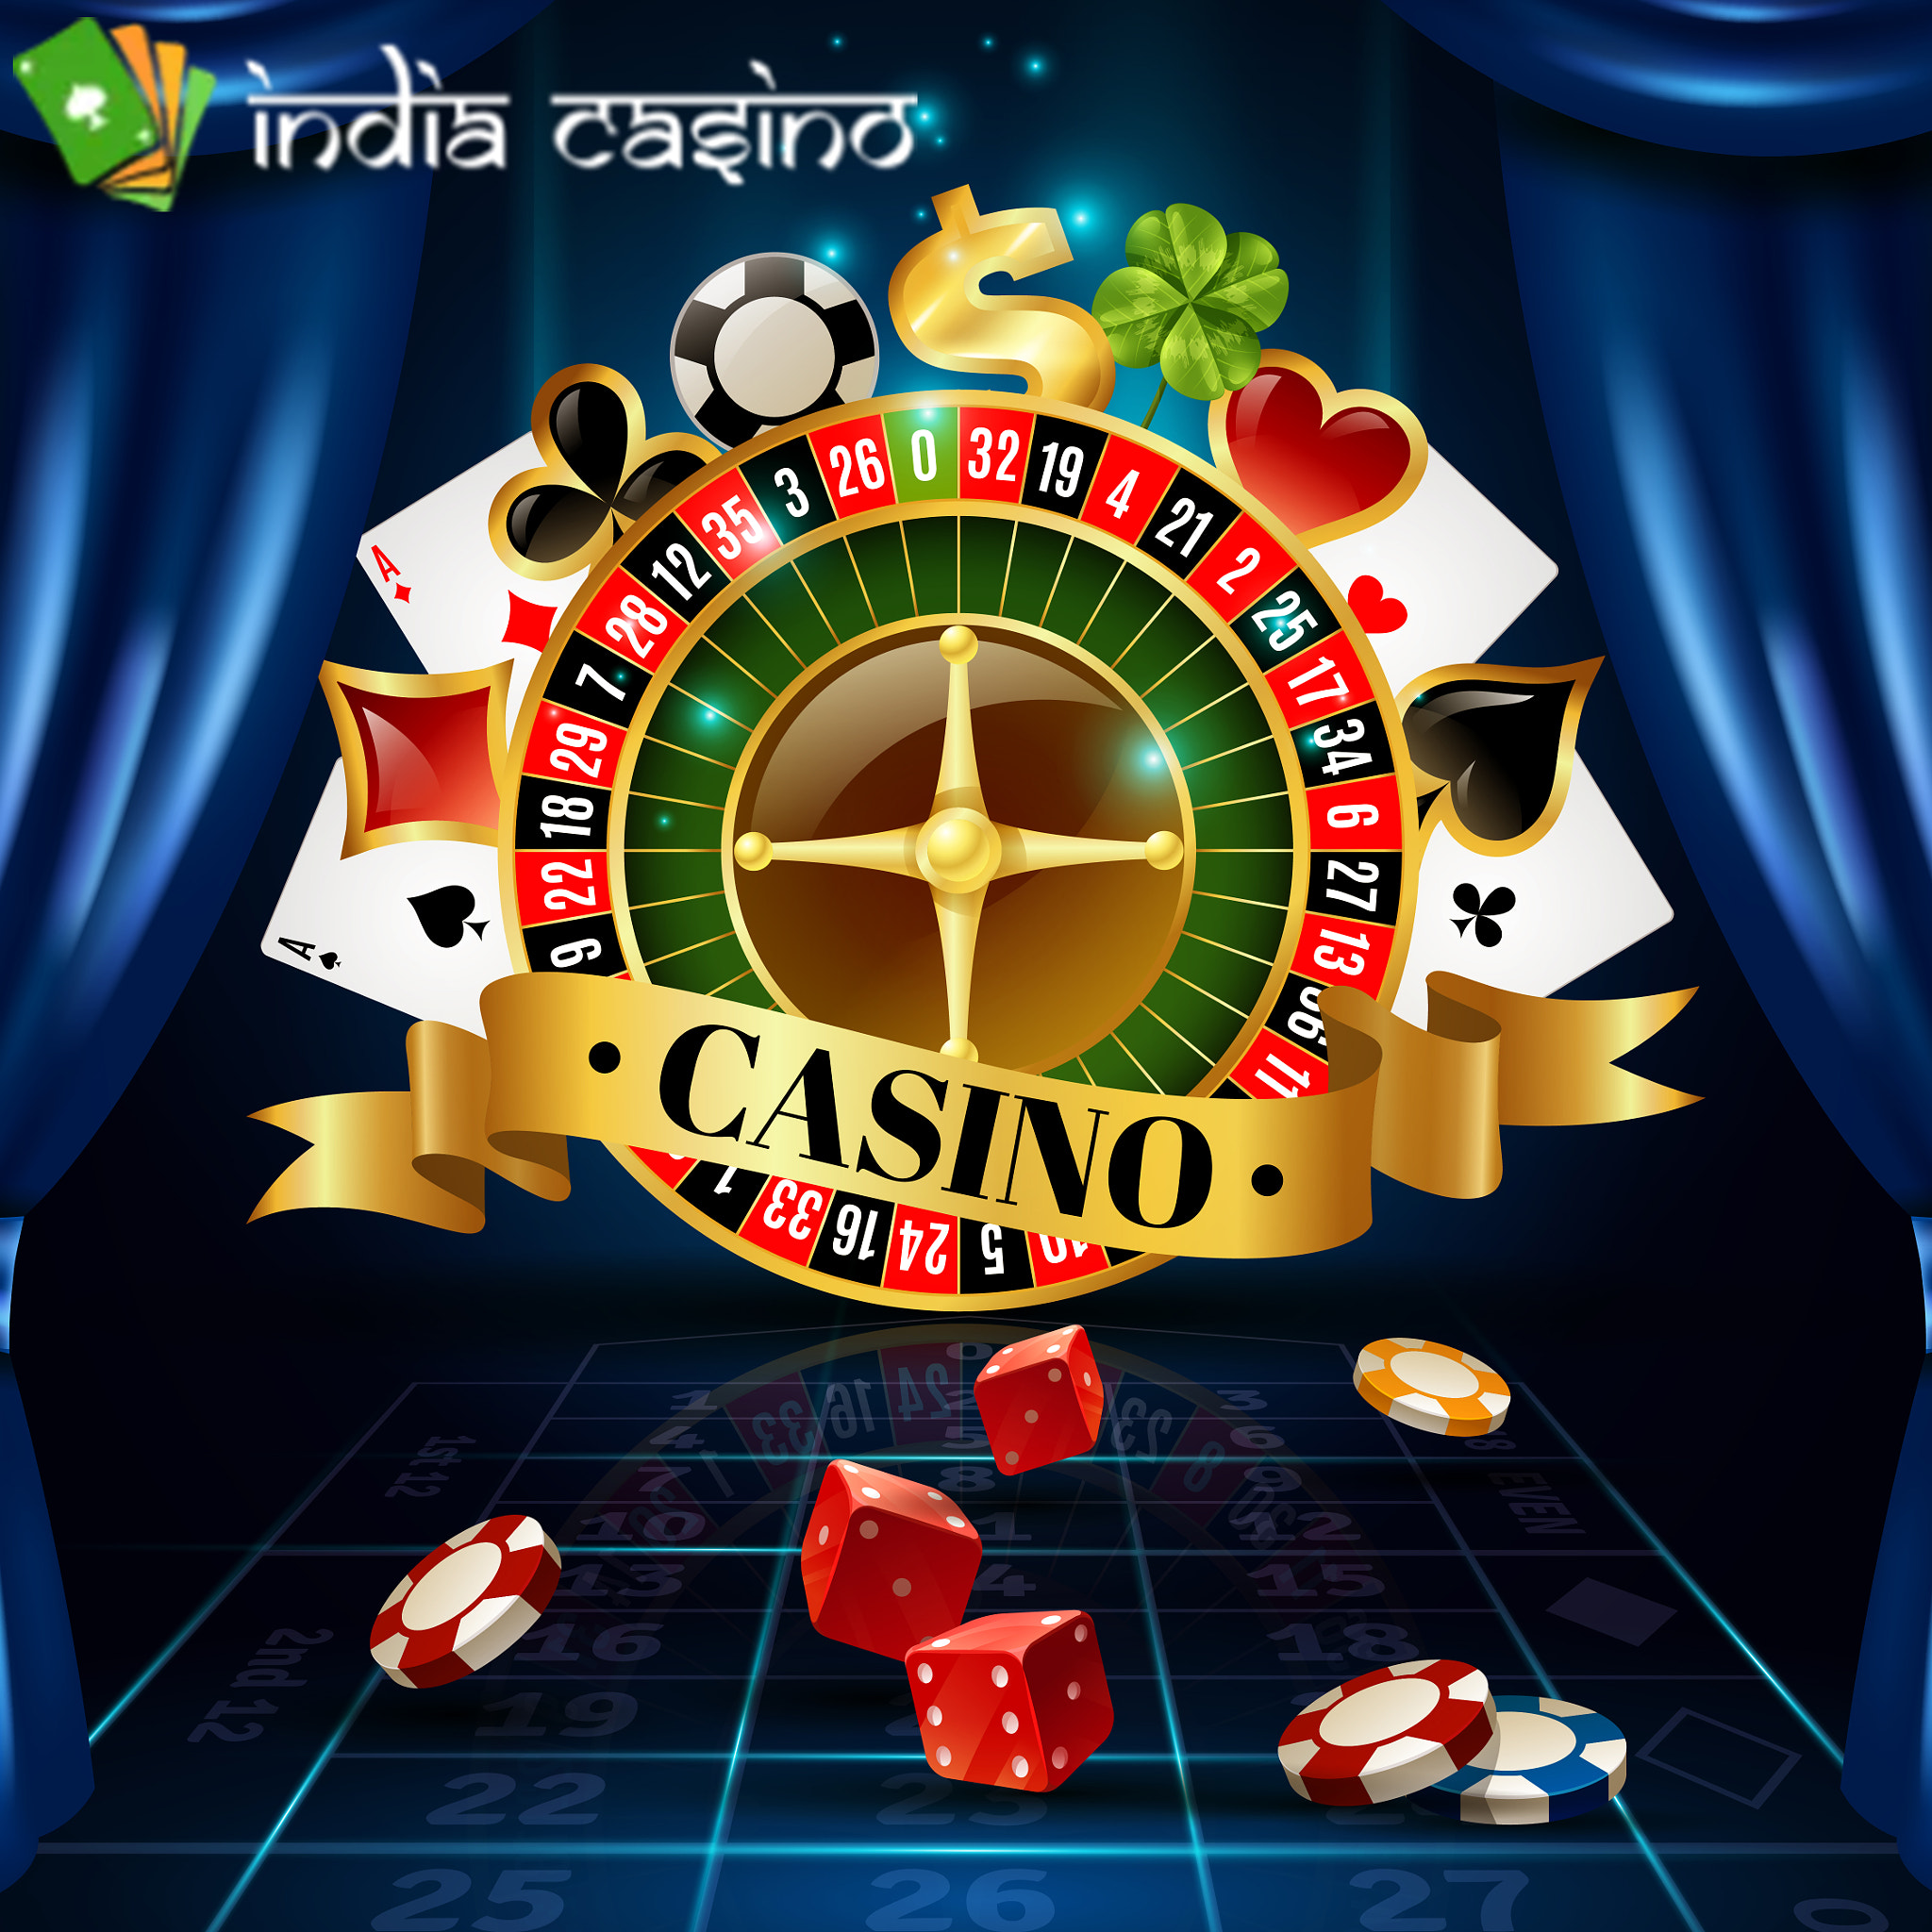 Play the best online casino games